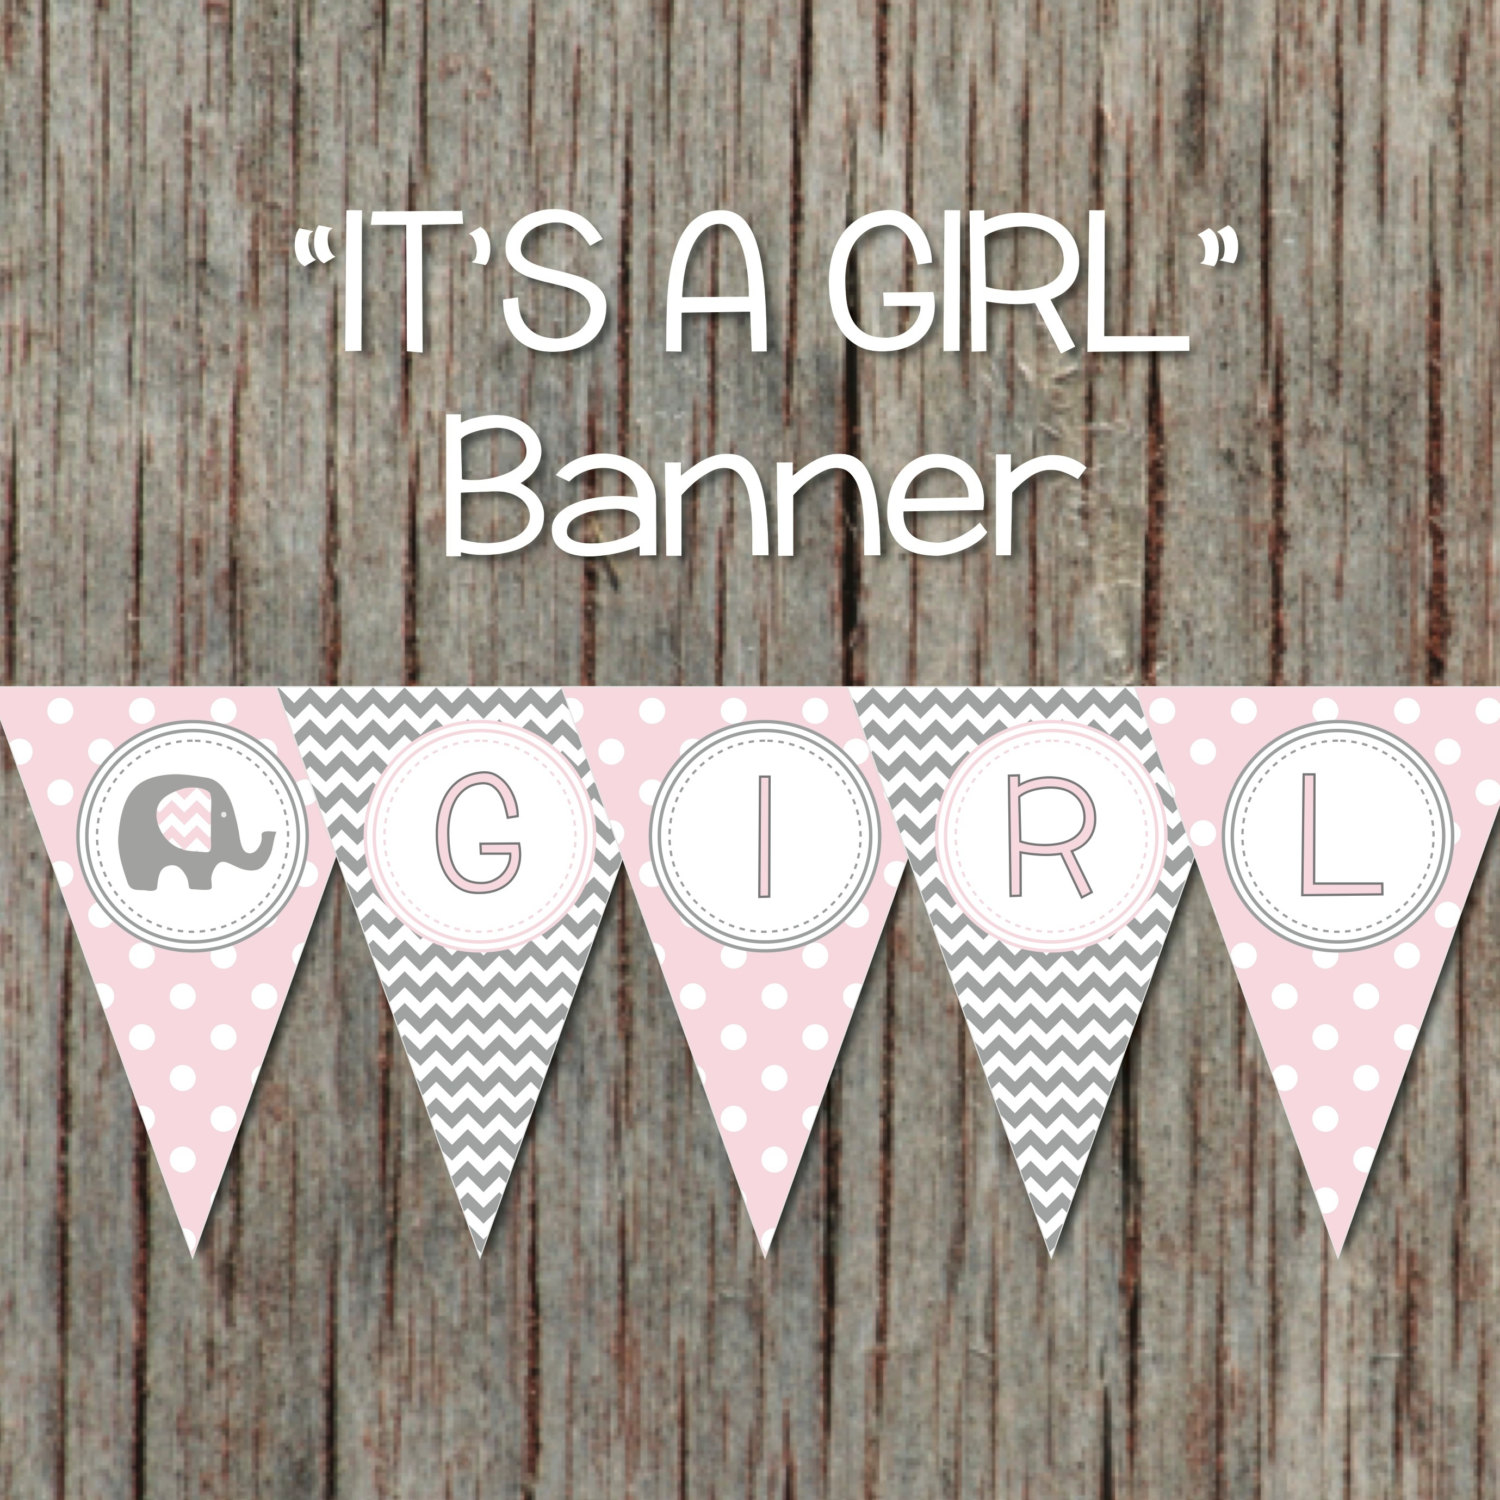 Full Size of Baby Shower:89+ Indulging Baby Shower Banner Picture Inspirations Baby Shower Banner Baby Shower Food Boy Baby Shower Giveaways Baby Shower Cake Ideas Baby Shower Game Prizes